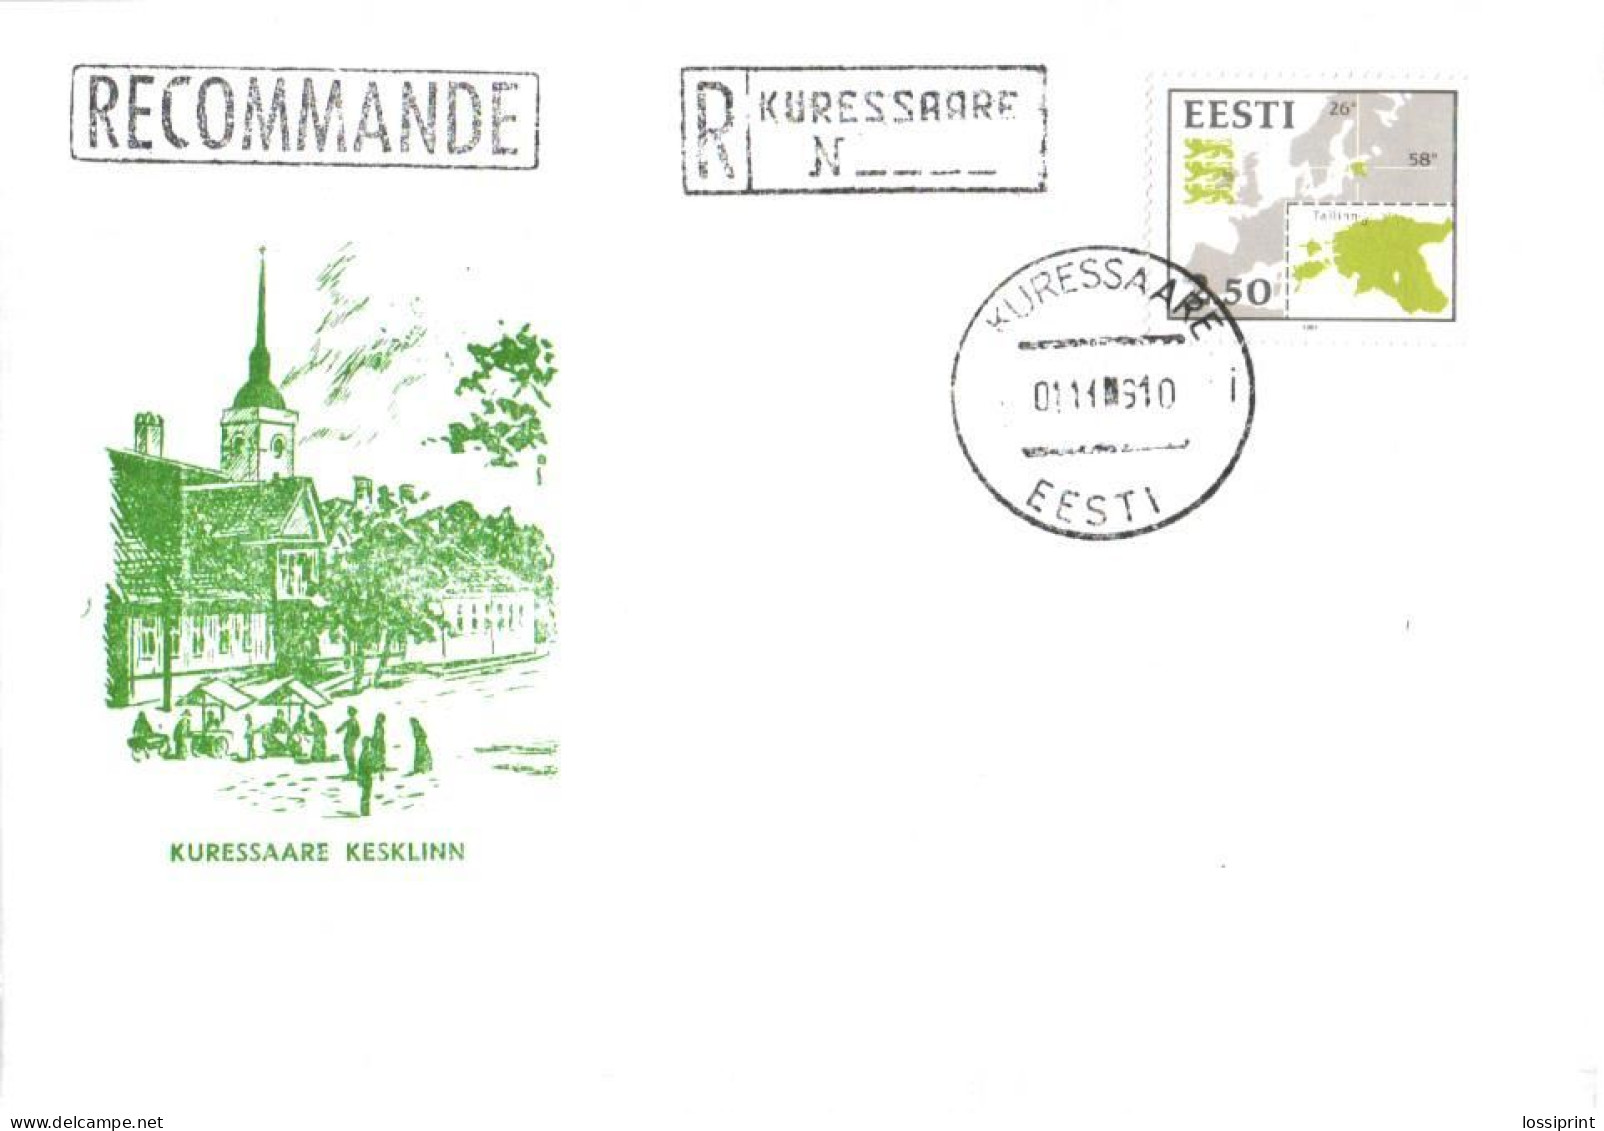 Estonia:FDC, Land Map Stamp With Kuressaare Registered Cancellation And Recommande Stamp, 1991 - Estonie